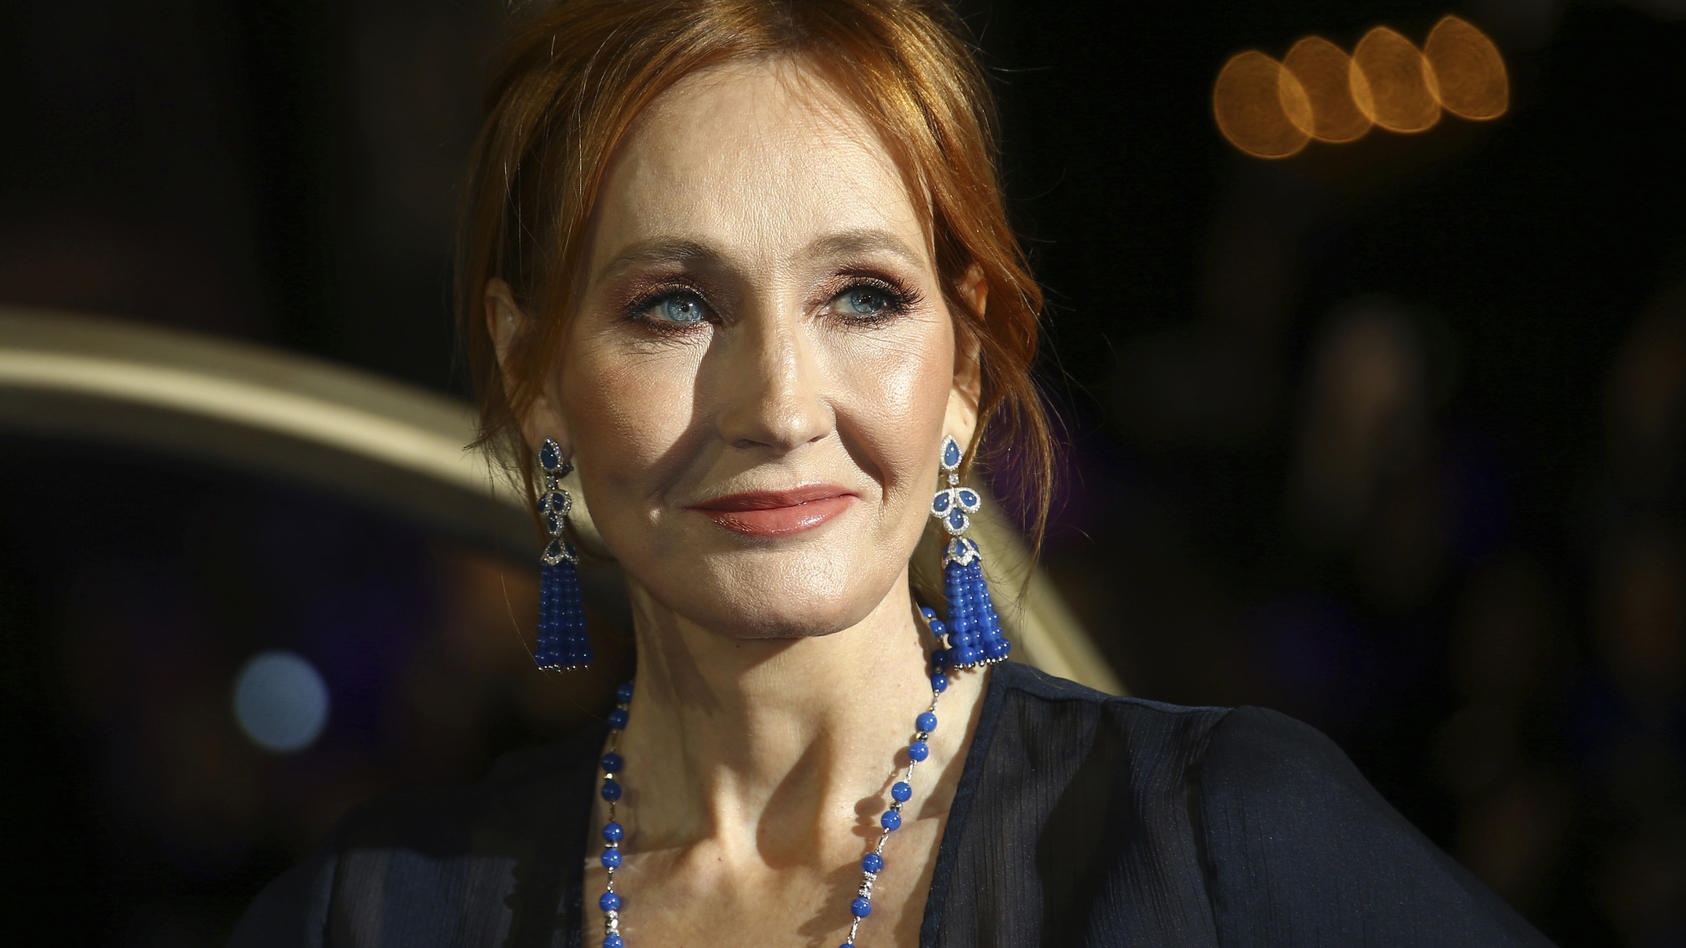 FILE - In this Nov. 13, 2018 file photo, author J.K. Rowling poses for photographers upon her arrival at the premiere of the film 'Fantastic Beasts: The Crimes of Grindelwald', in London. JK Rowling is publishing a new story called â€œThe Ickabog,â€